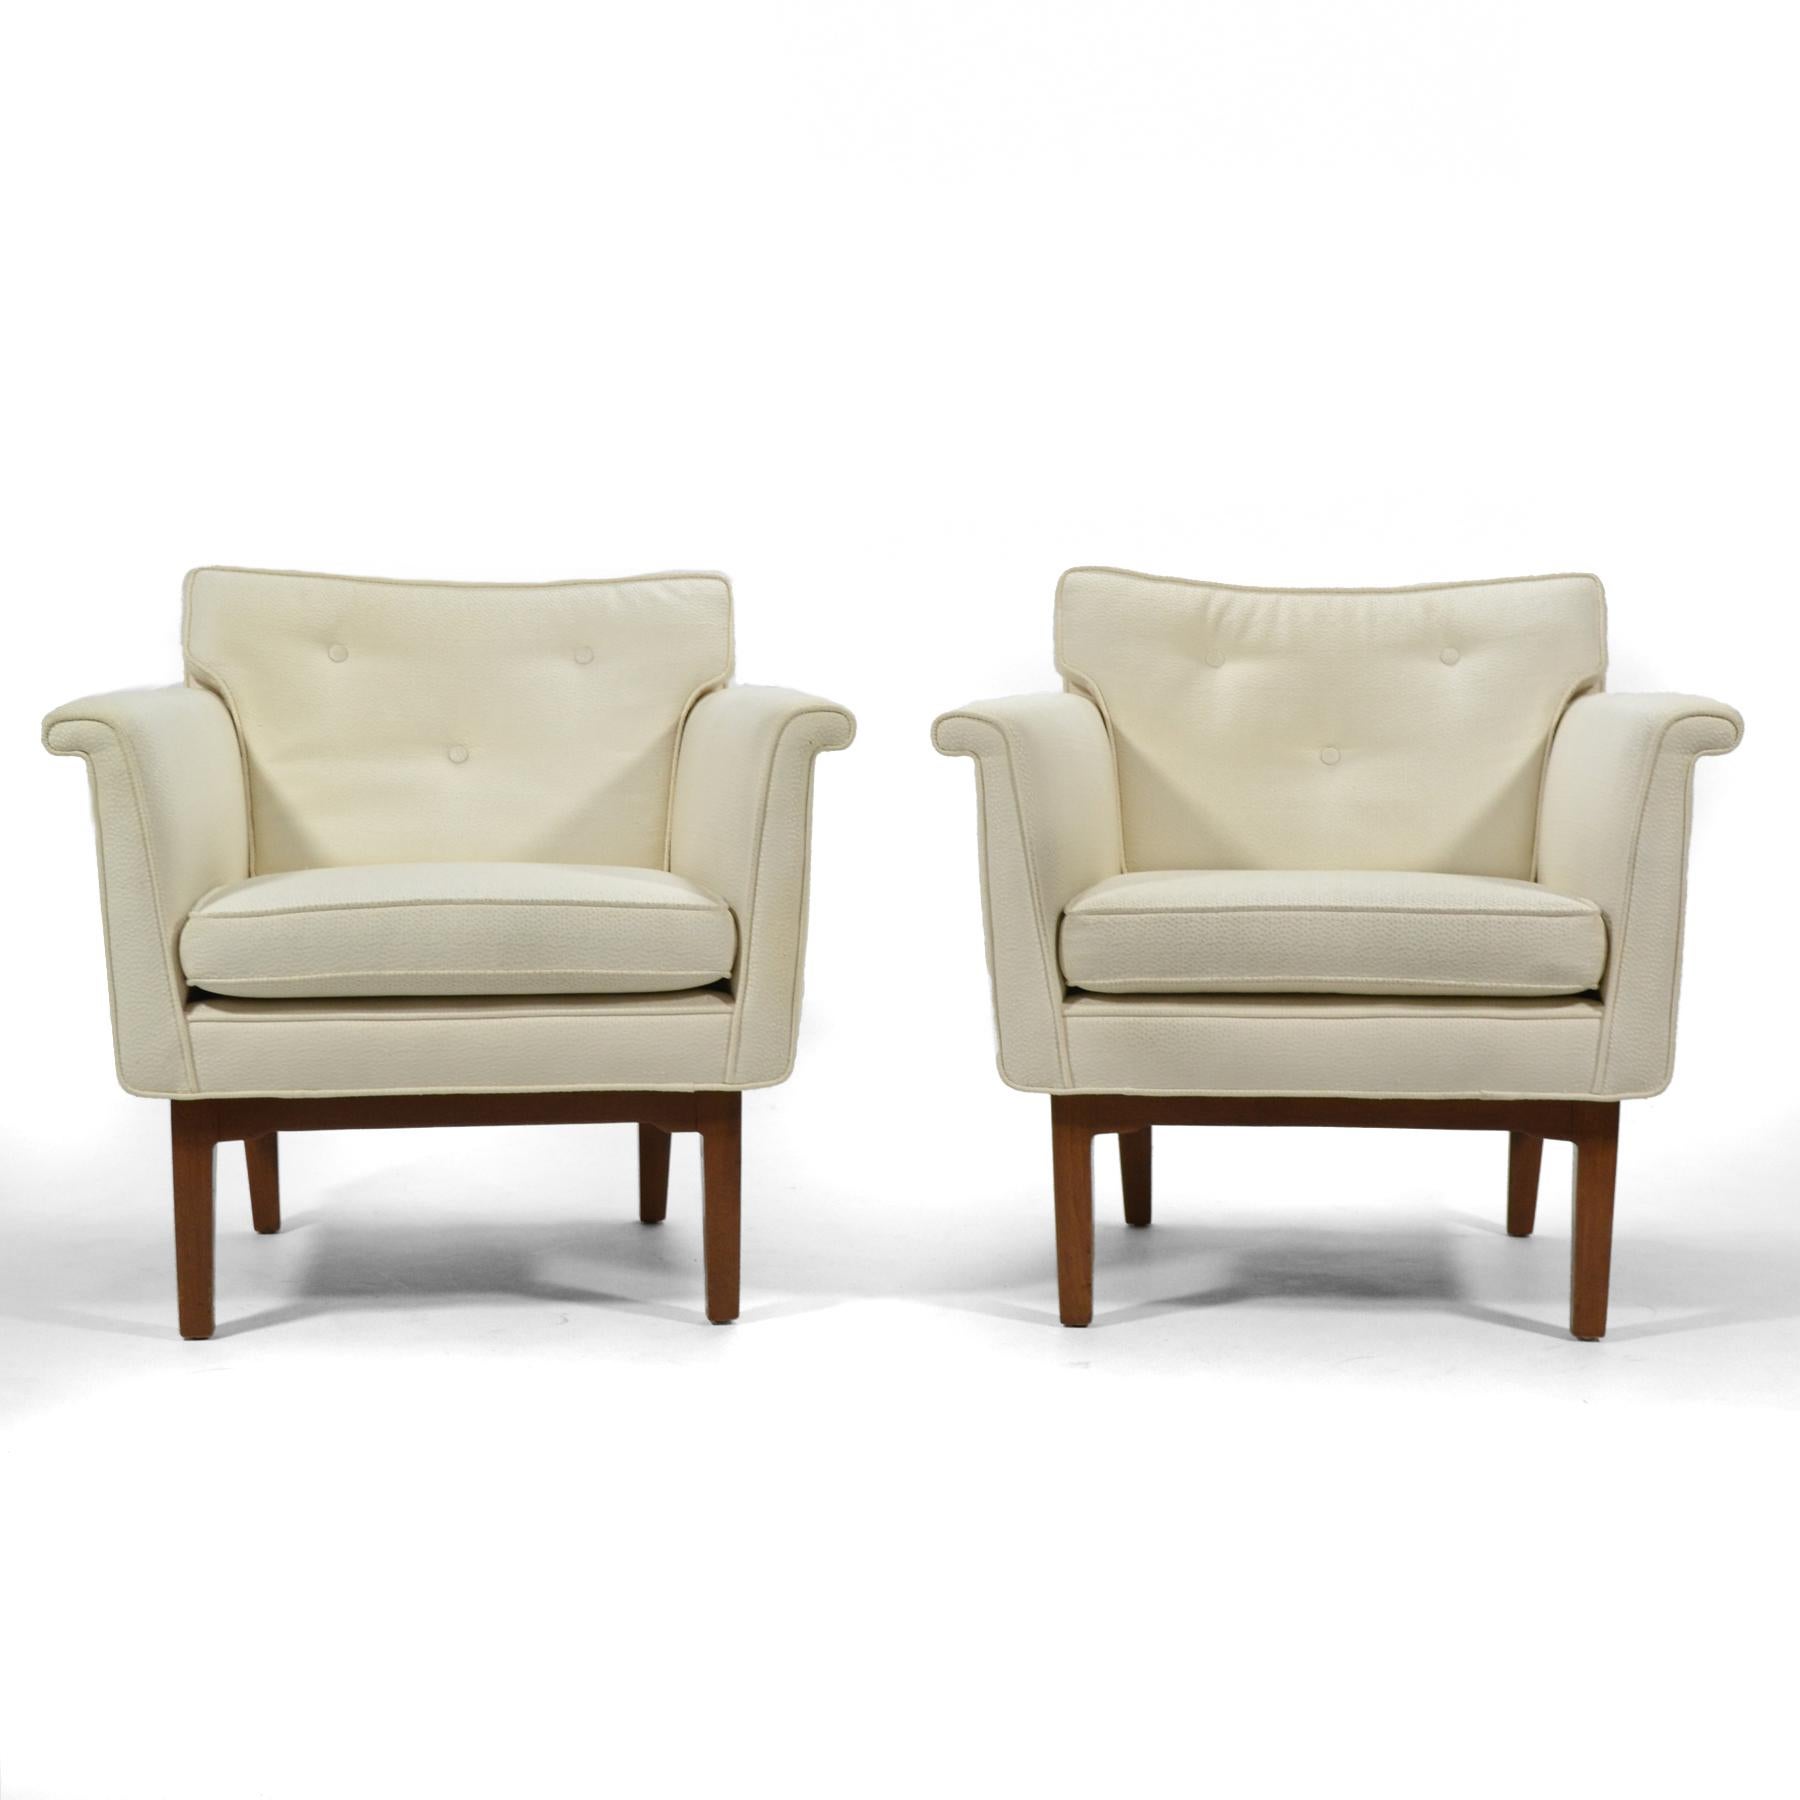 Mid-Century Modern Edward Wormley Pair of Lounge Chairs by Dunbar